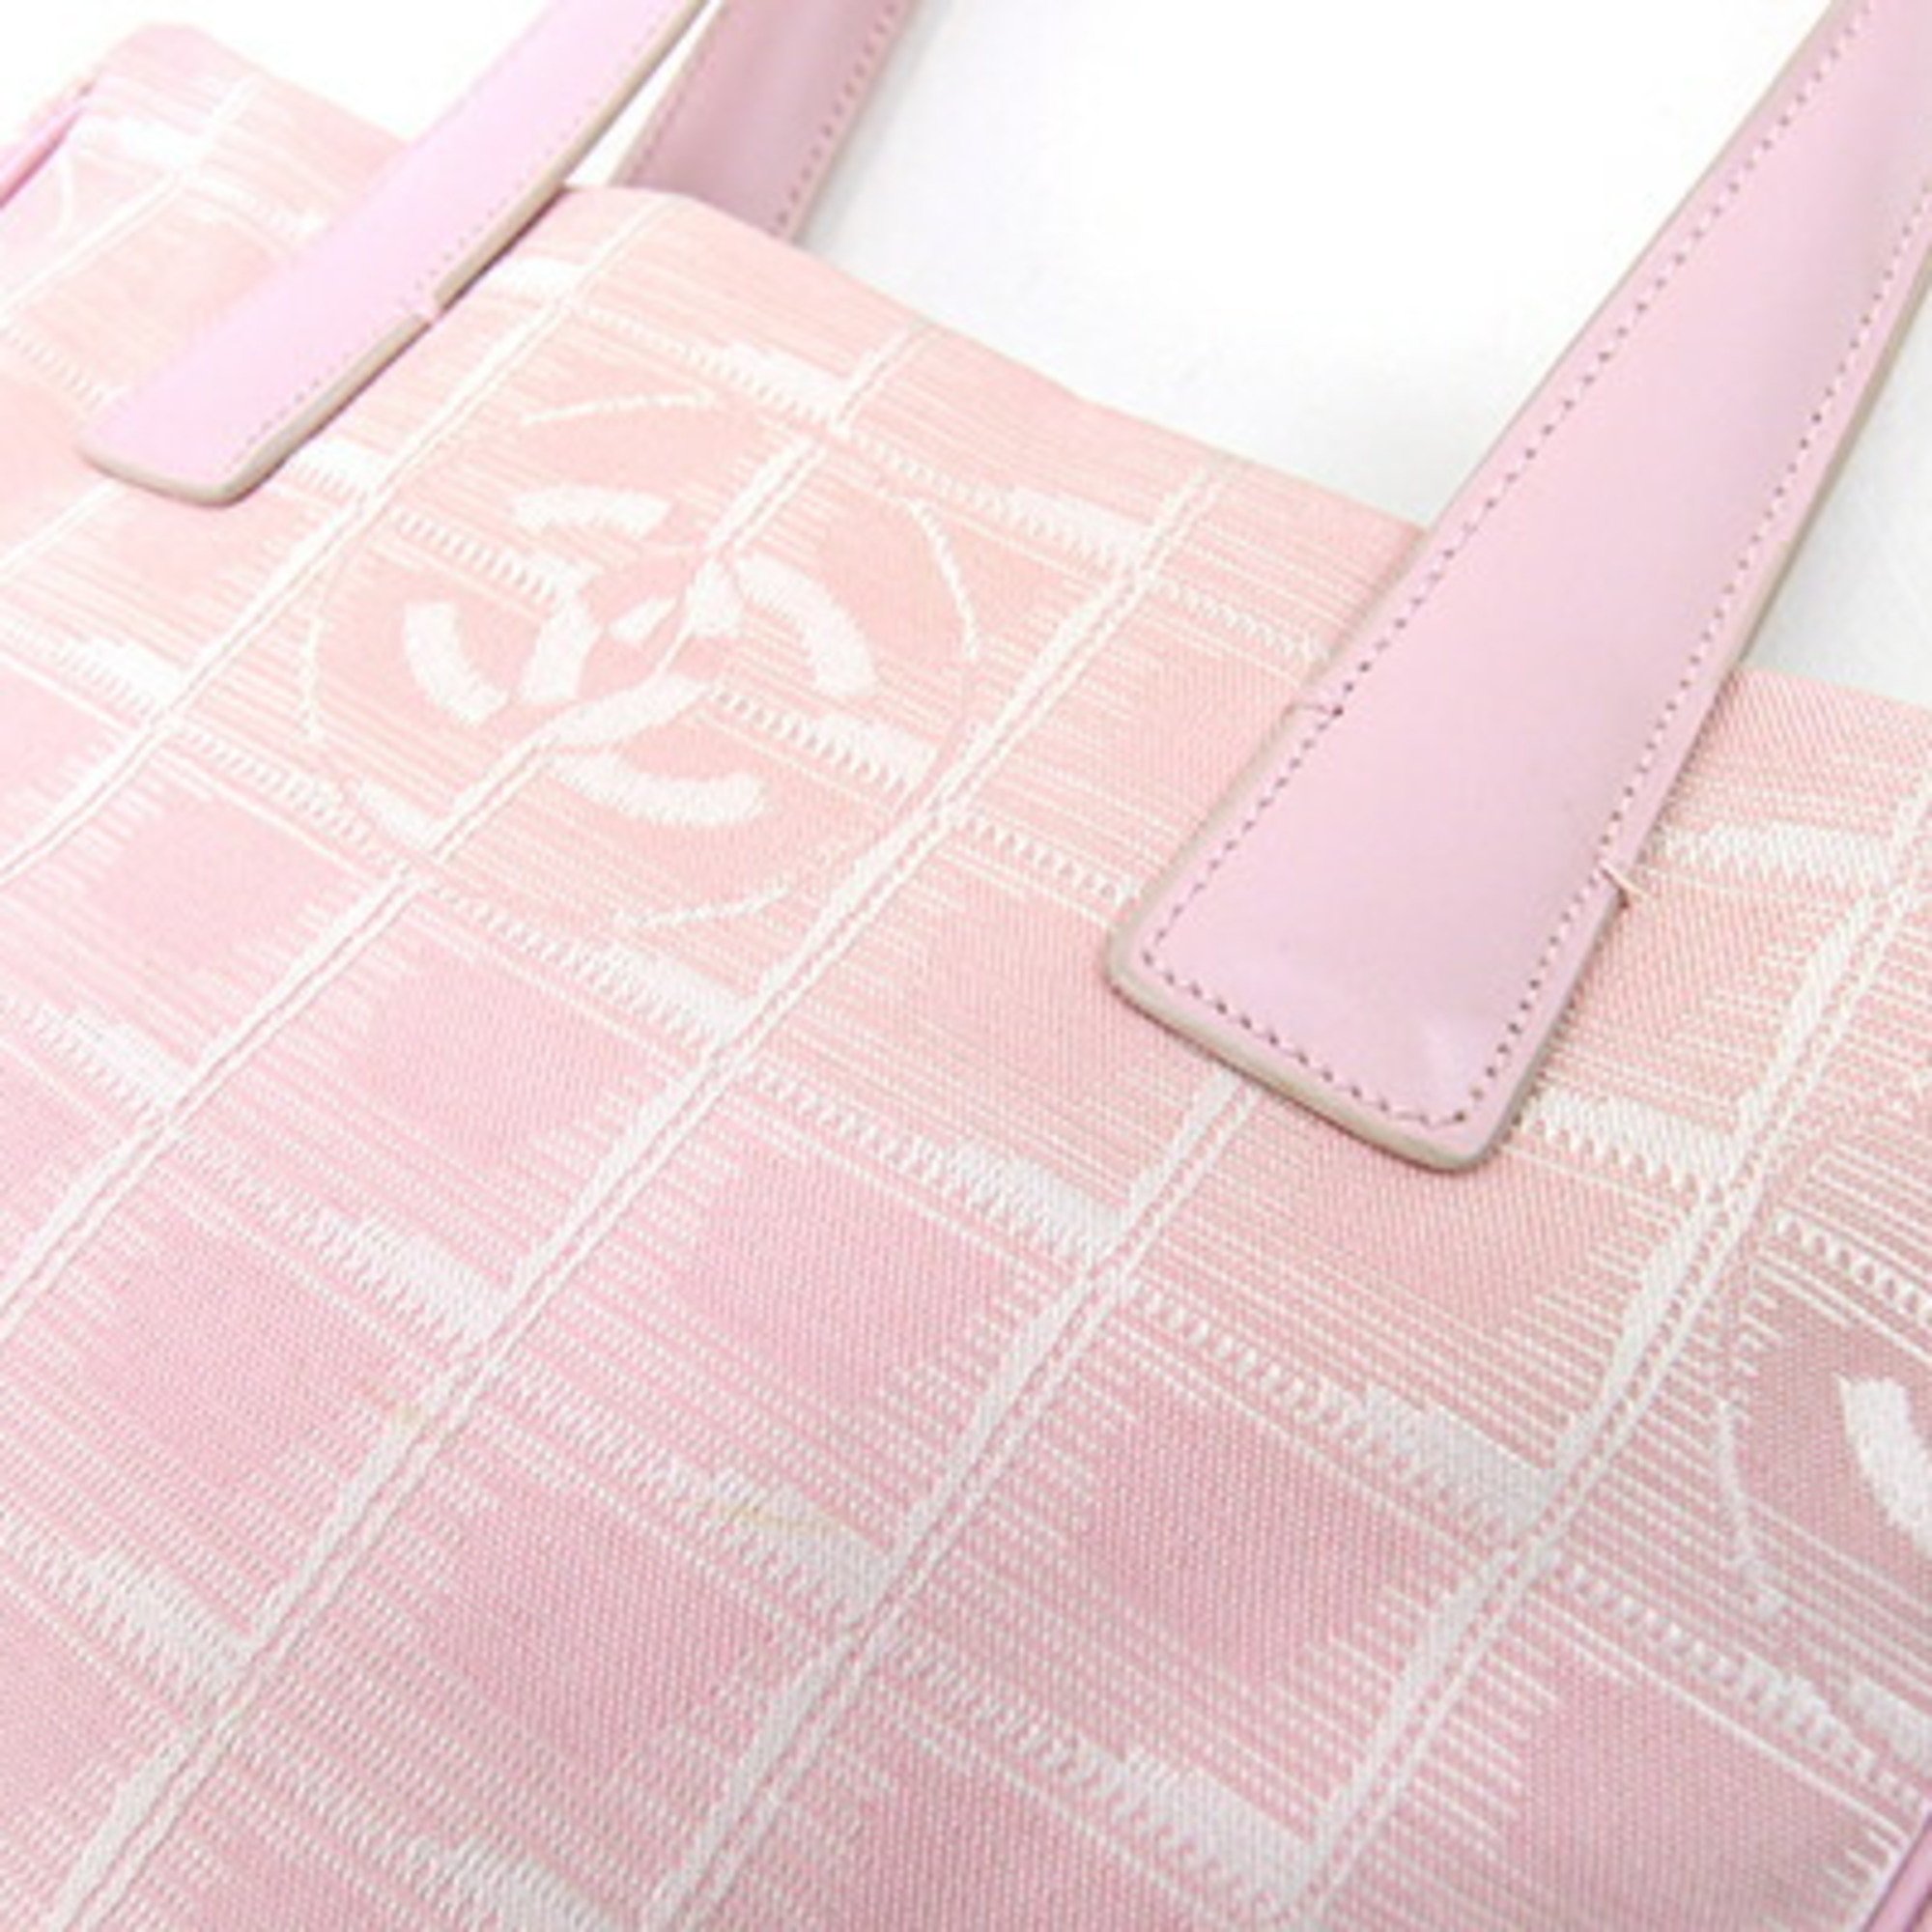 Chanel Handbag New Travel Line Tote TPM Pink Canvas Leather Women's CHANEL